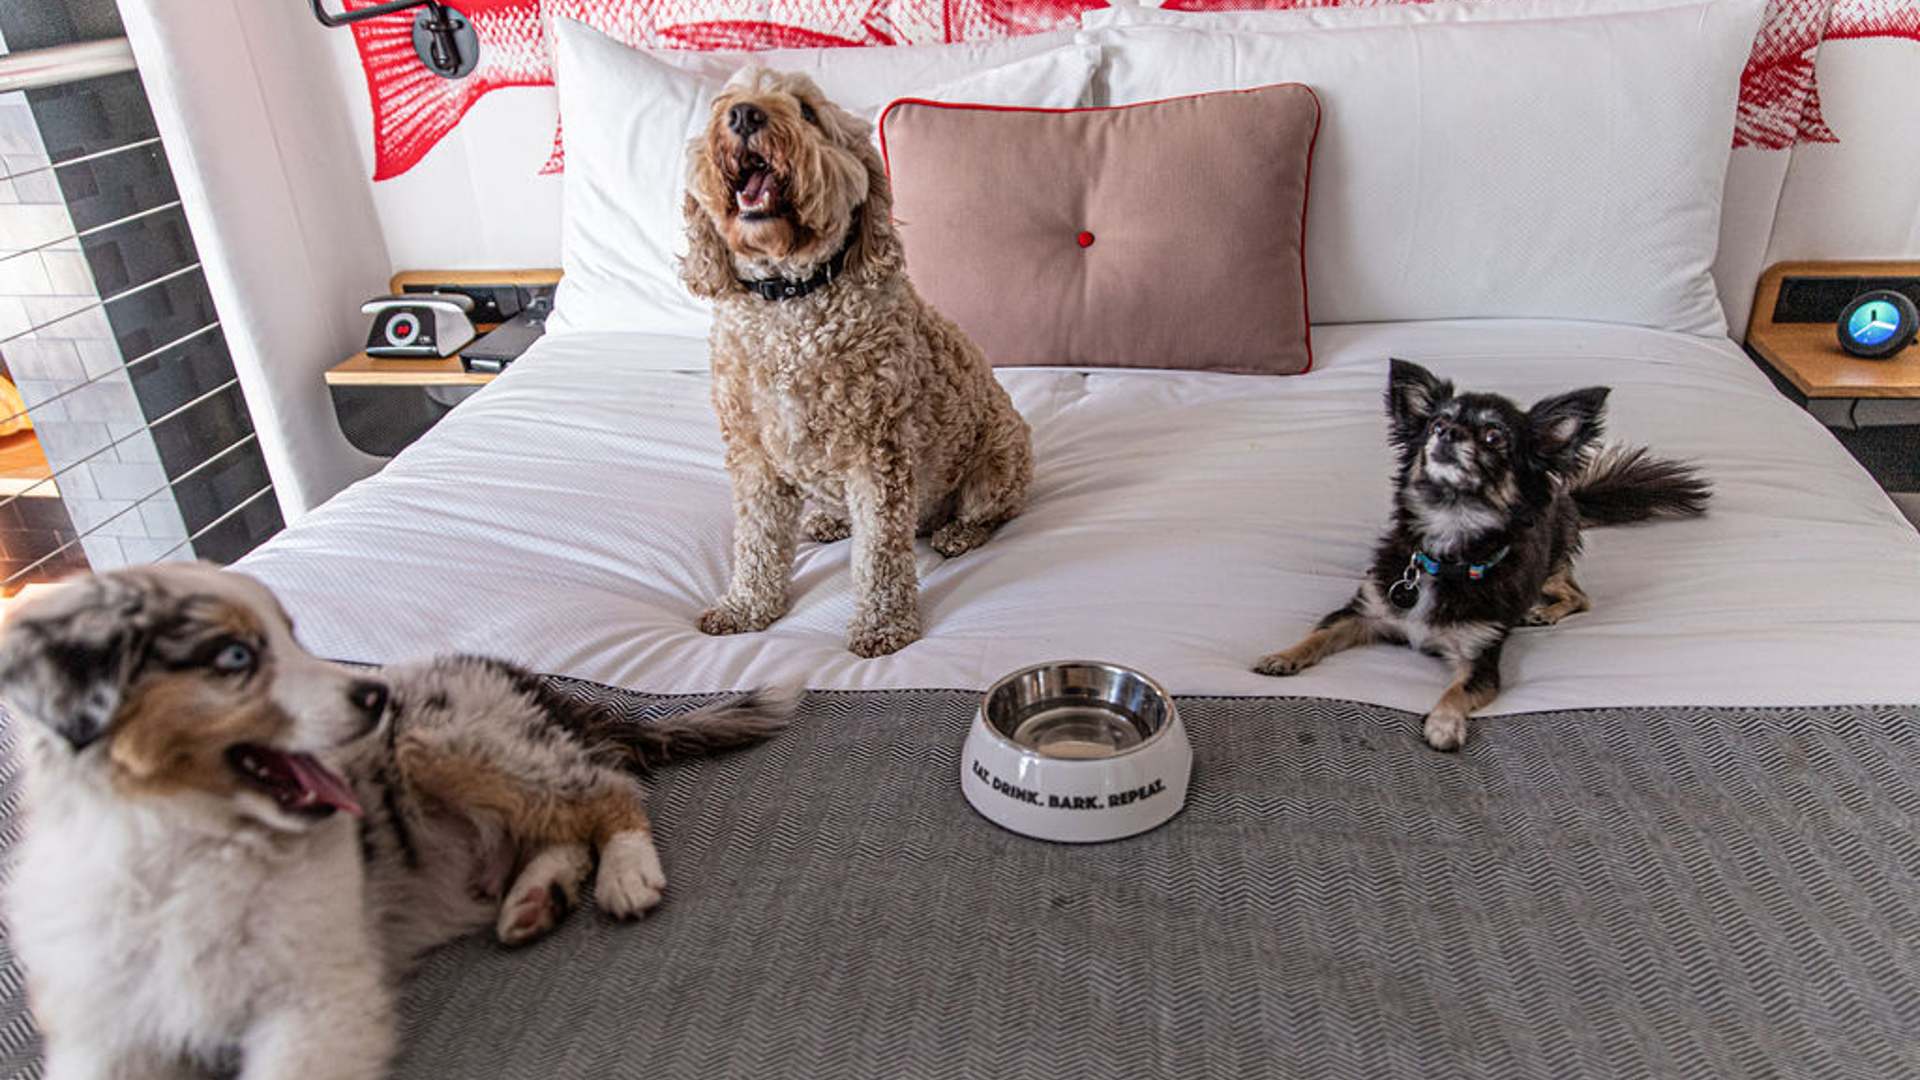 Ovolo - one of the best dog-friendly hotels in Sydney(pet-friendly hotel Sydney)